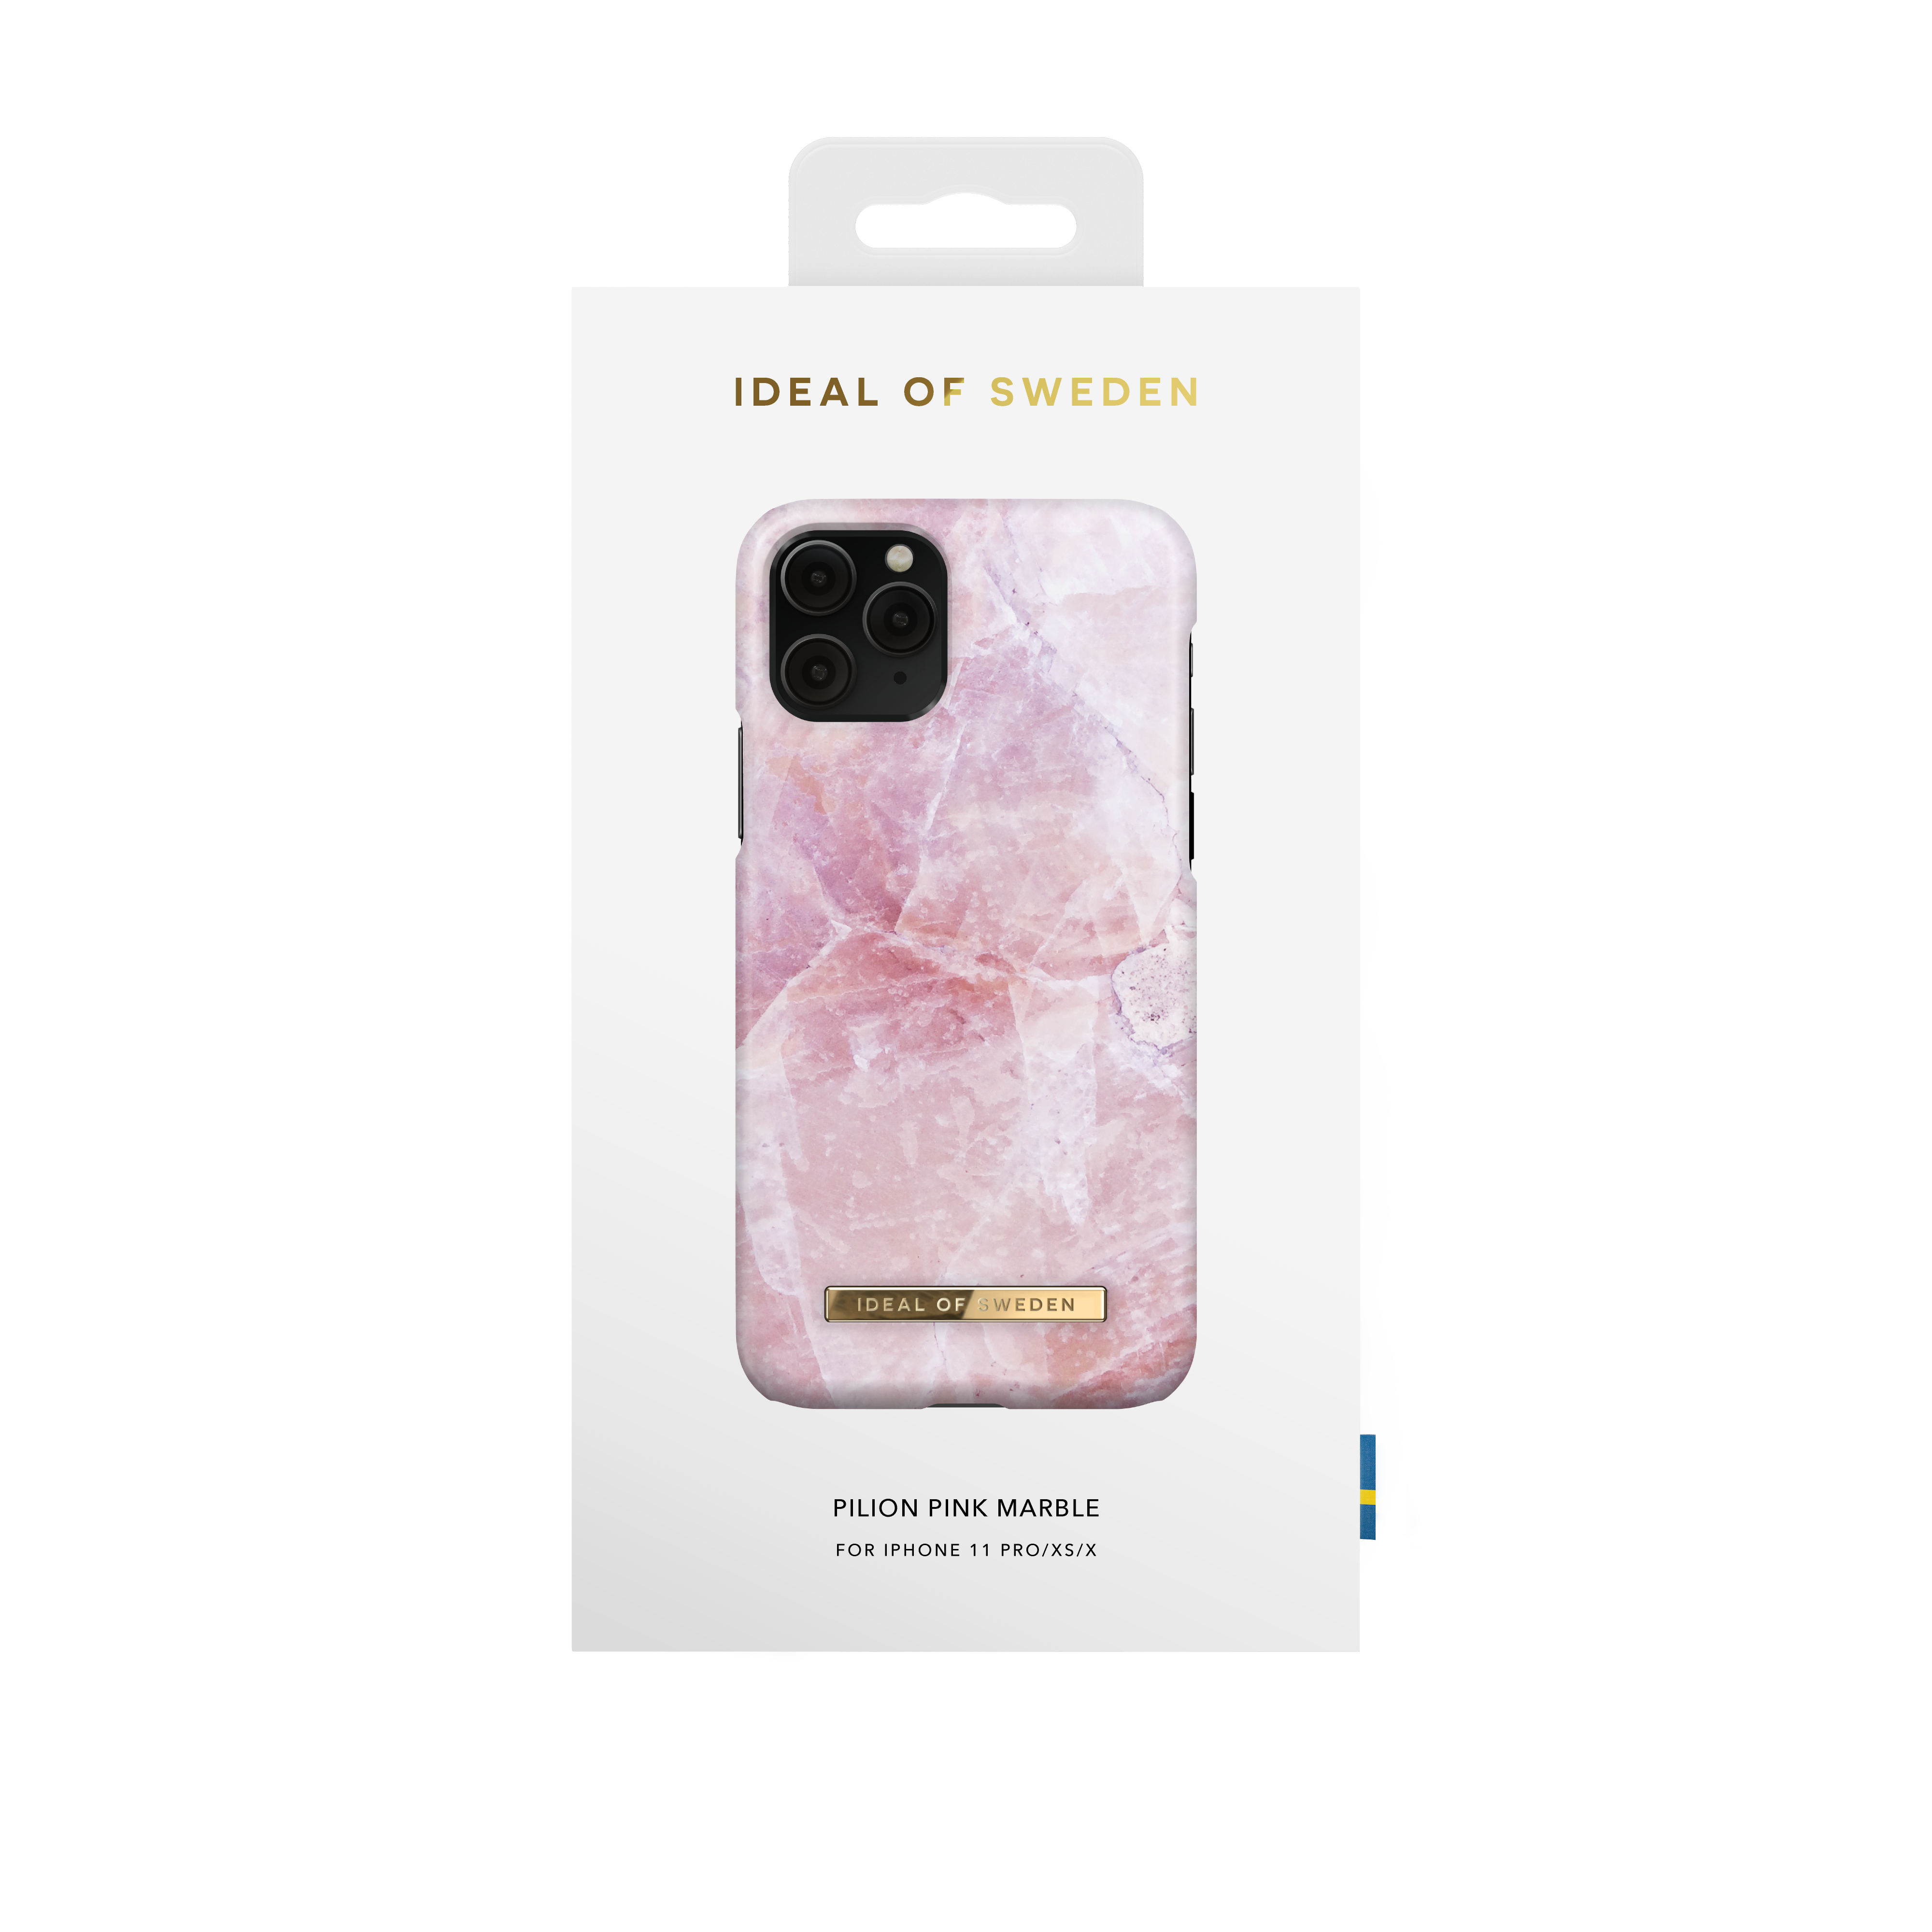 OF iPhone iPhone Pilion IDFCS17-I1958-52, 11 XS, Apple, IDEAL Marble SWEDEN X, Backcover, Pink iPhone Pro,